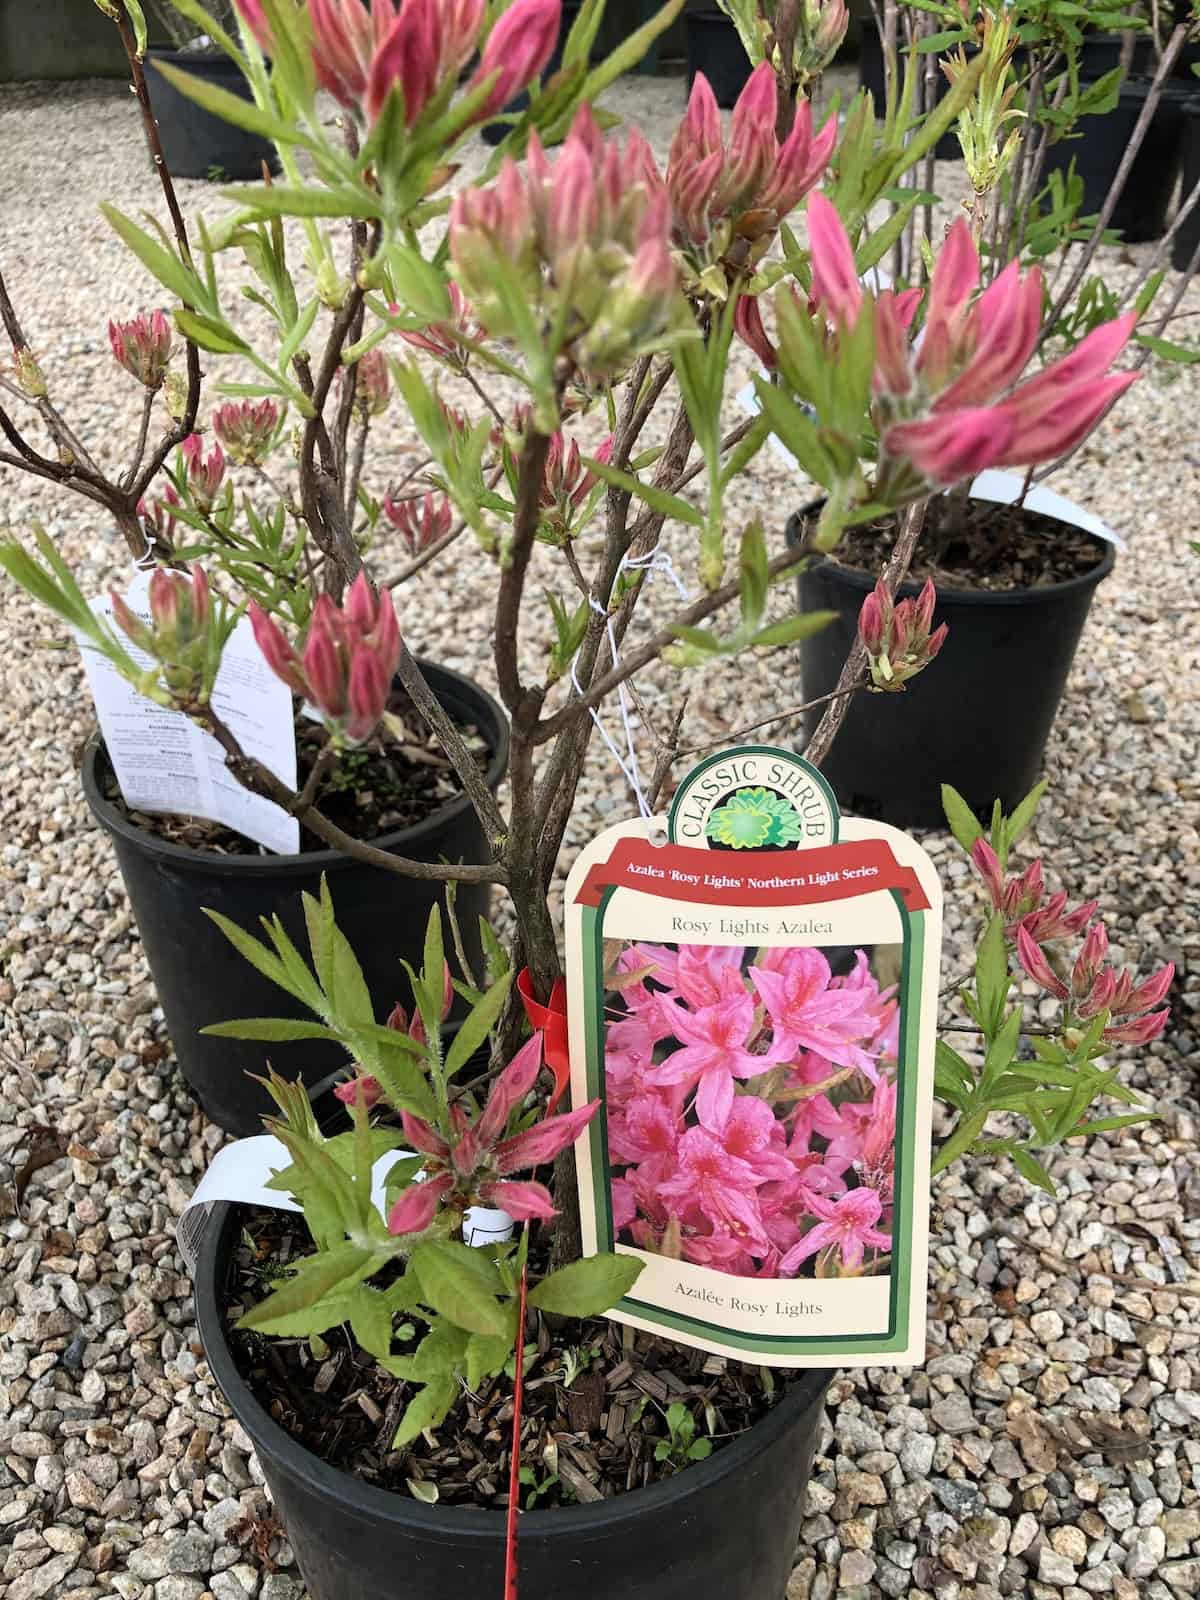 Rosy lights azelea for sale at nursery with pink flowers